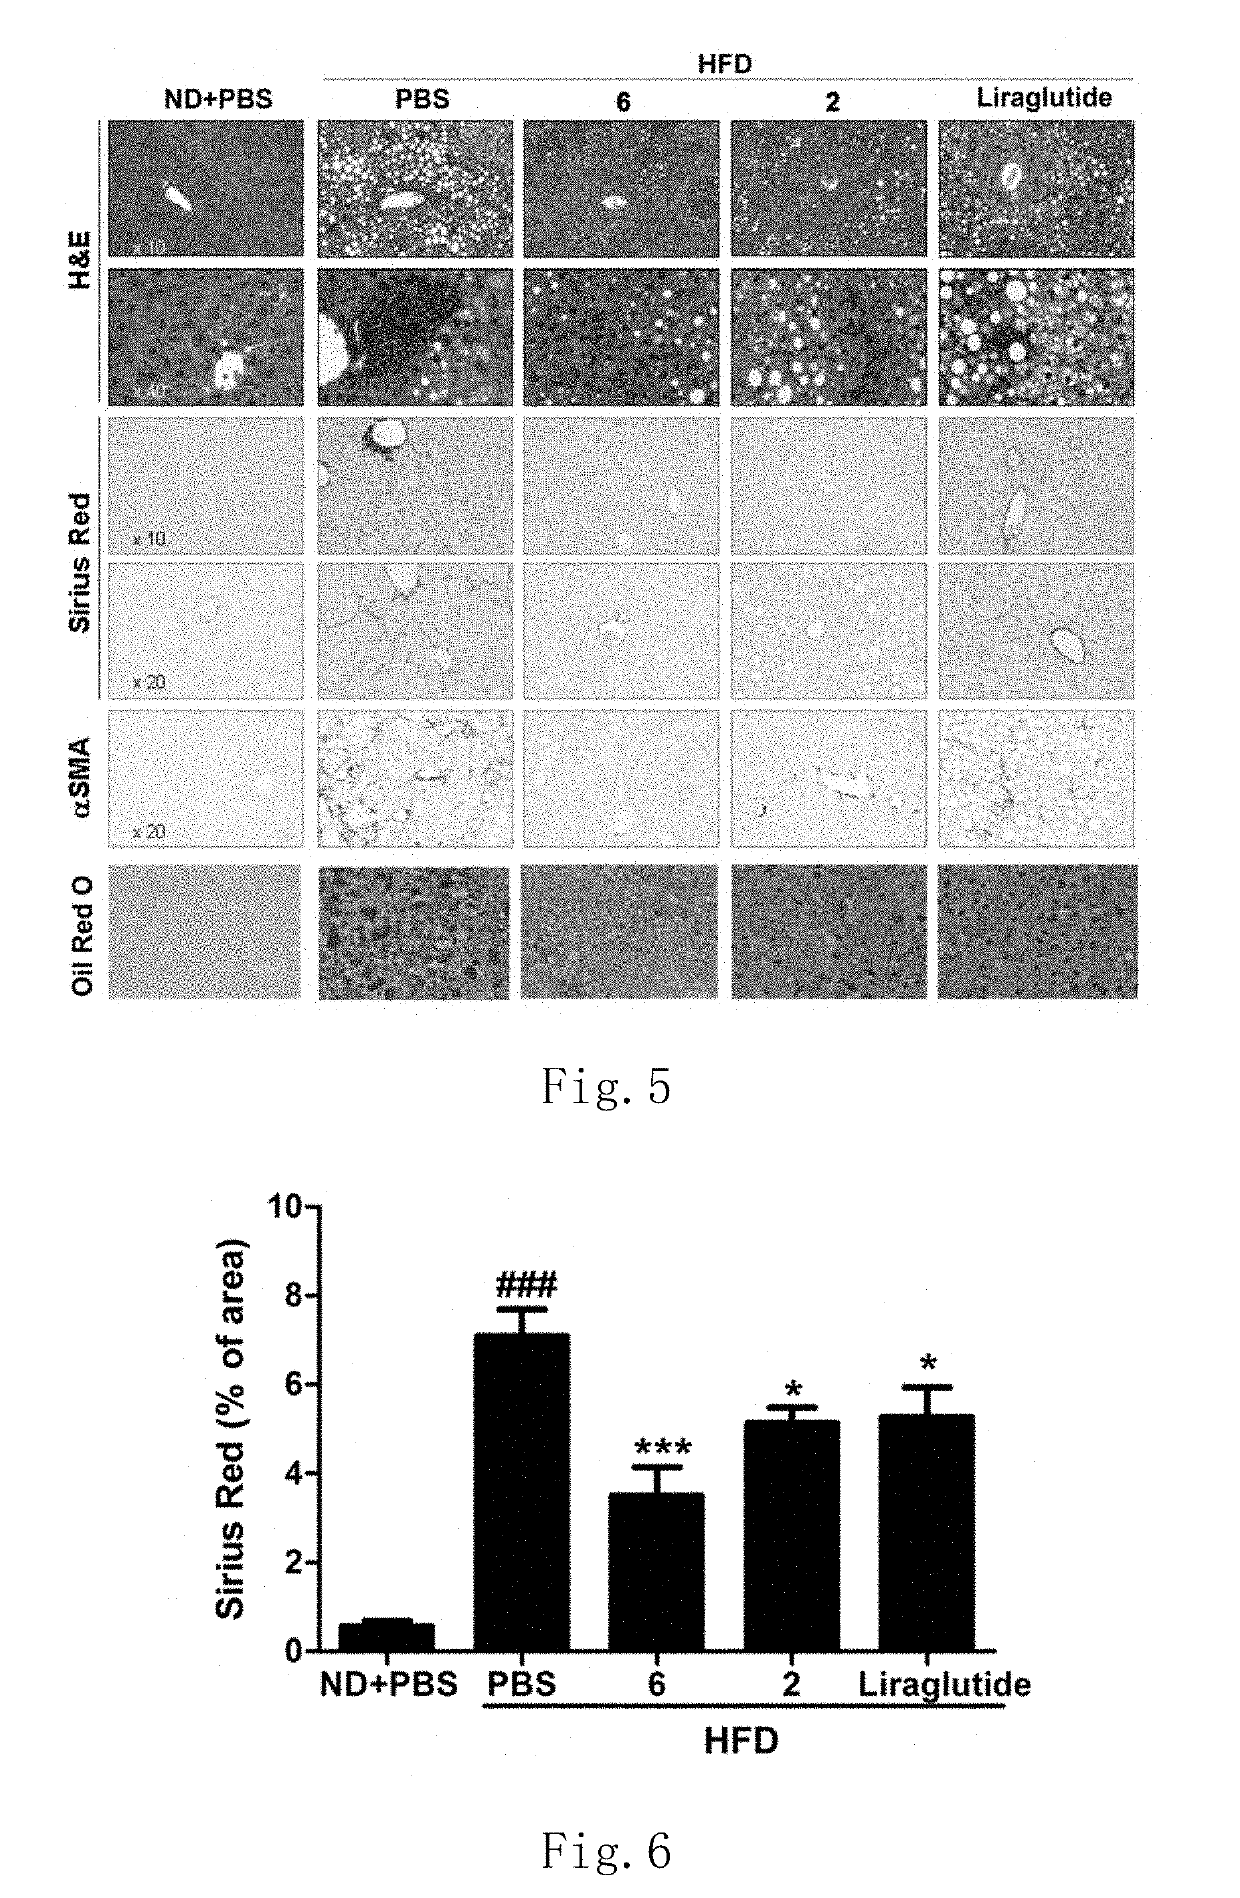 Glp-1r/gcgr dual target agonist polypeptide for treatment of fatty liver diseases, hyperlipemia and arteriosclerosis